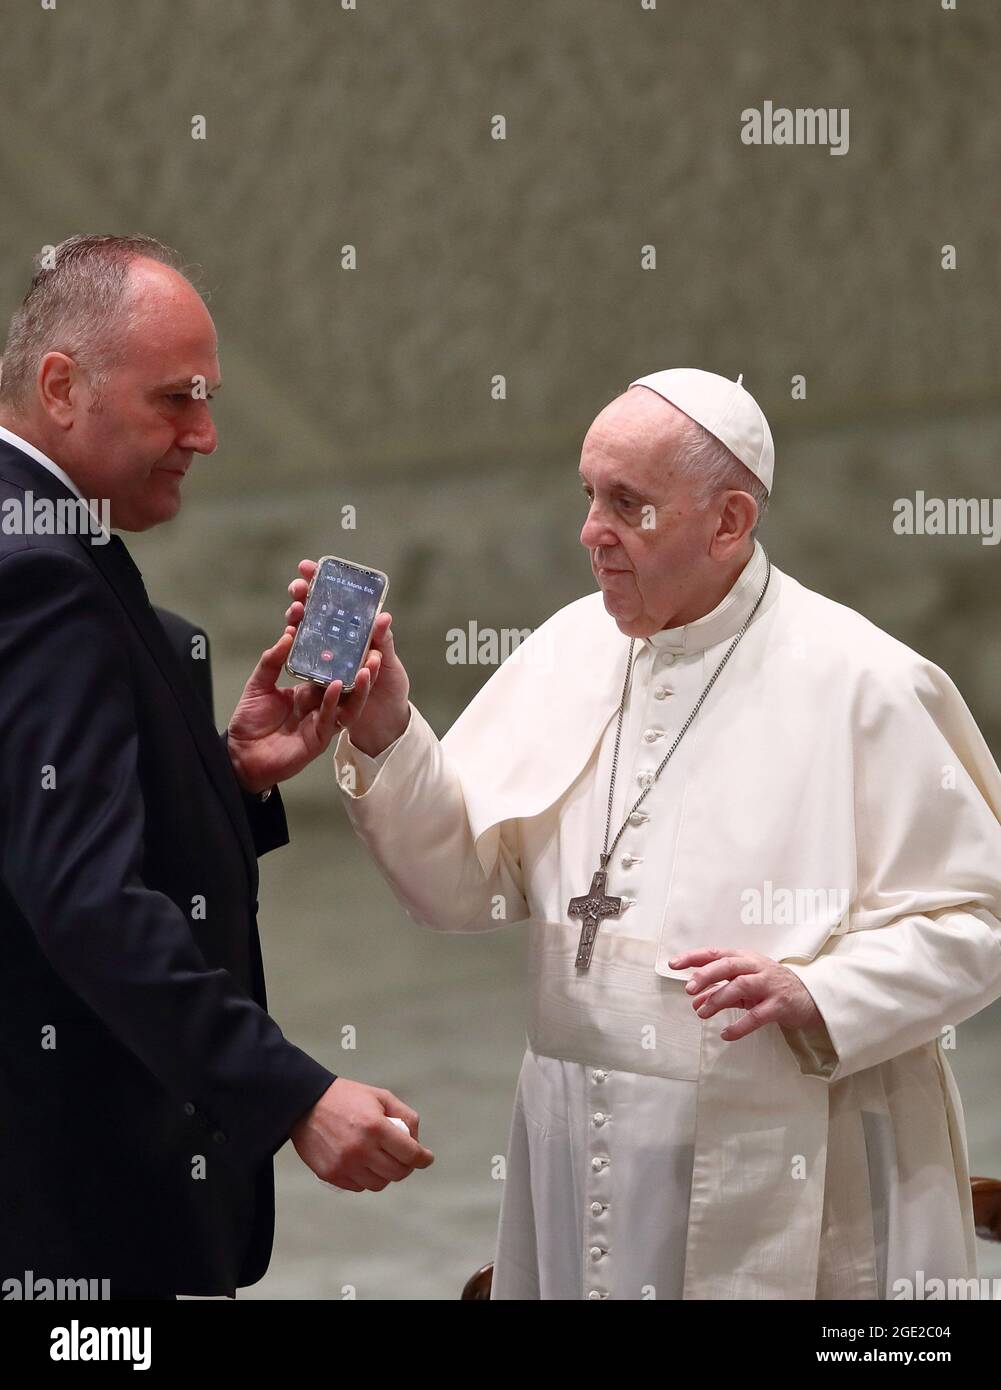 Pope Francis is interrupted by his butler Piergiorgio Zanetti for a cell  phone call during the General Audience in the Paul VI Hall. Vatican City  (Vatican), August 11th, 2021 (Photo by Grzegorz